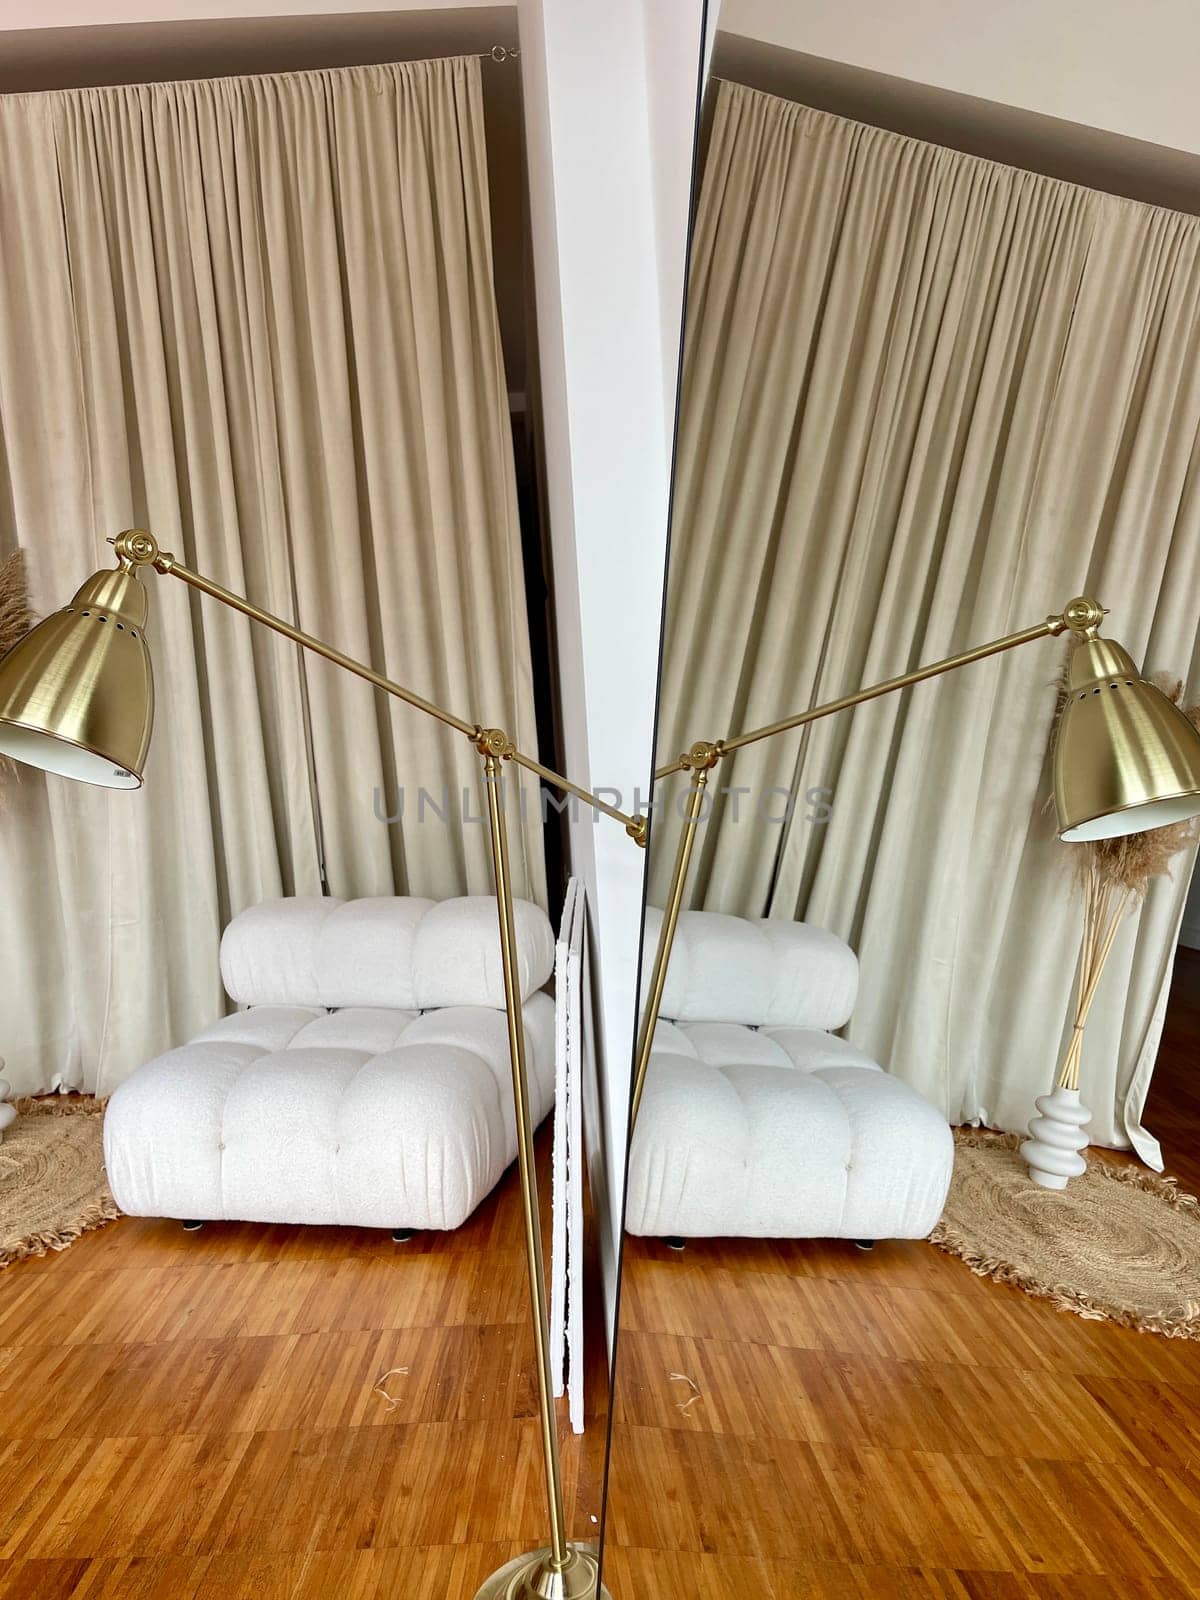 Reflection of a part of the interior with a lamp and an upholstered chair in the mirror. High quality photo